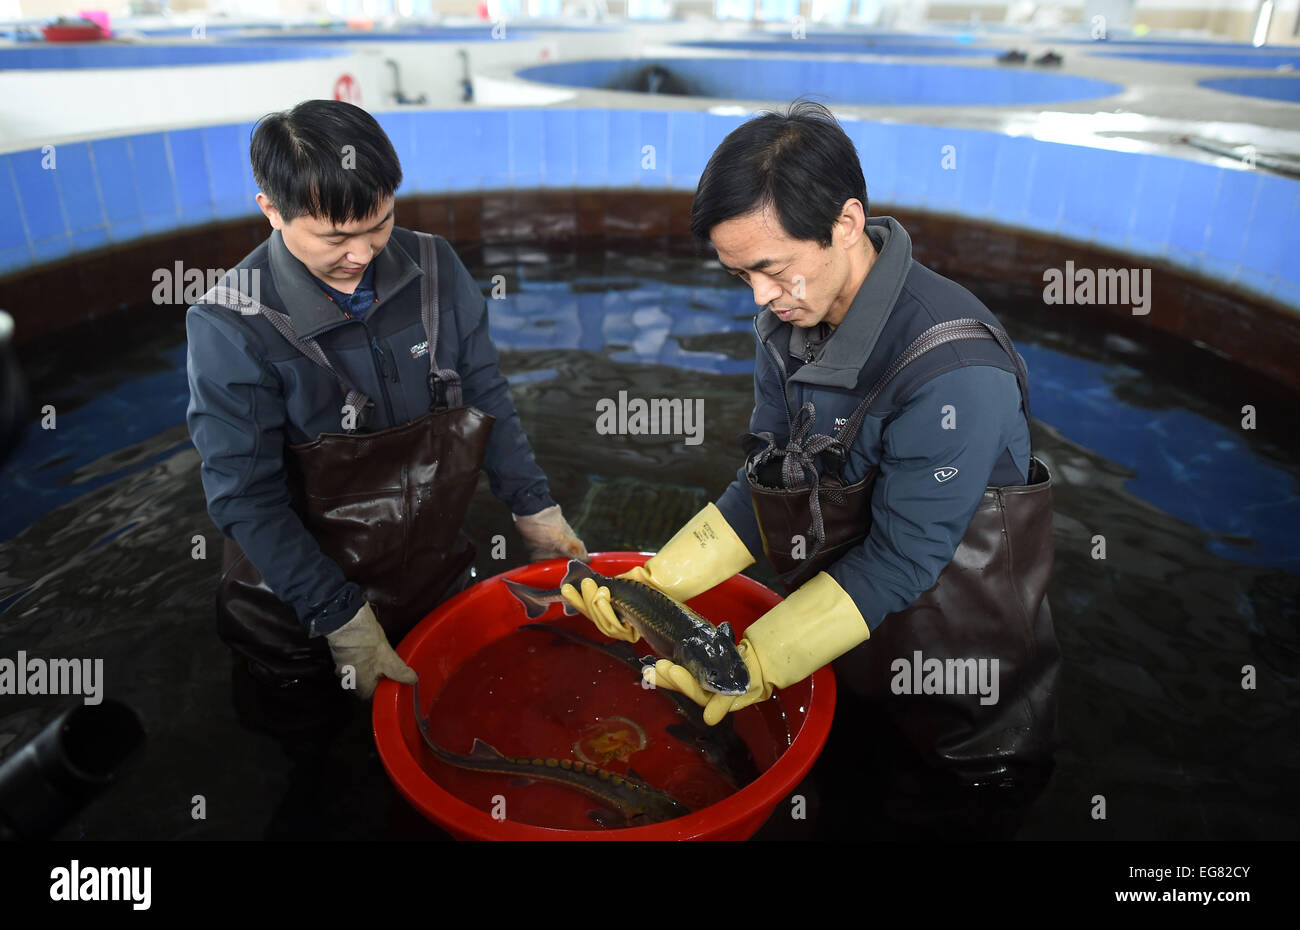 (150219) -- YICHANG, Feb. 19, 2015 (Xinhua) -- Breeders check artificially-bred Chinese sturgeons in a tank at the Chinese Sturgeons Research Institute (CSRI) in Yichang, central China's Hubei Province, Feb. 19, 2015. Chinese sturgeons, nicknamed 'aquatic pandas', are listed as a wild creature under state protection. Researchers with CSRI succeeded in artificially inseminating and spawning a culture of sturgeons in 2009. Since then fish have been released into the river every year to save the species from extinction. At present, some 5,000 artificially-bred sturgeons live in the CSRI, which is Stock Photo